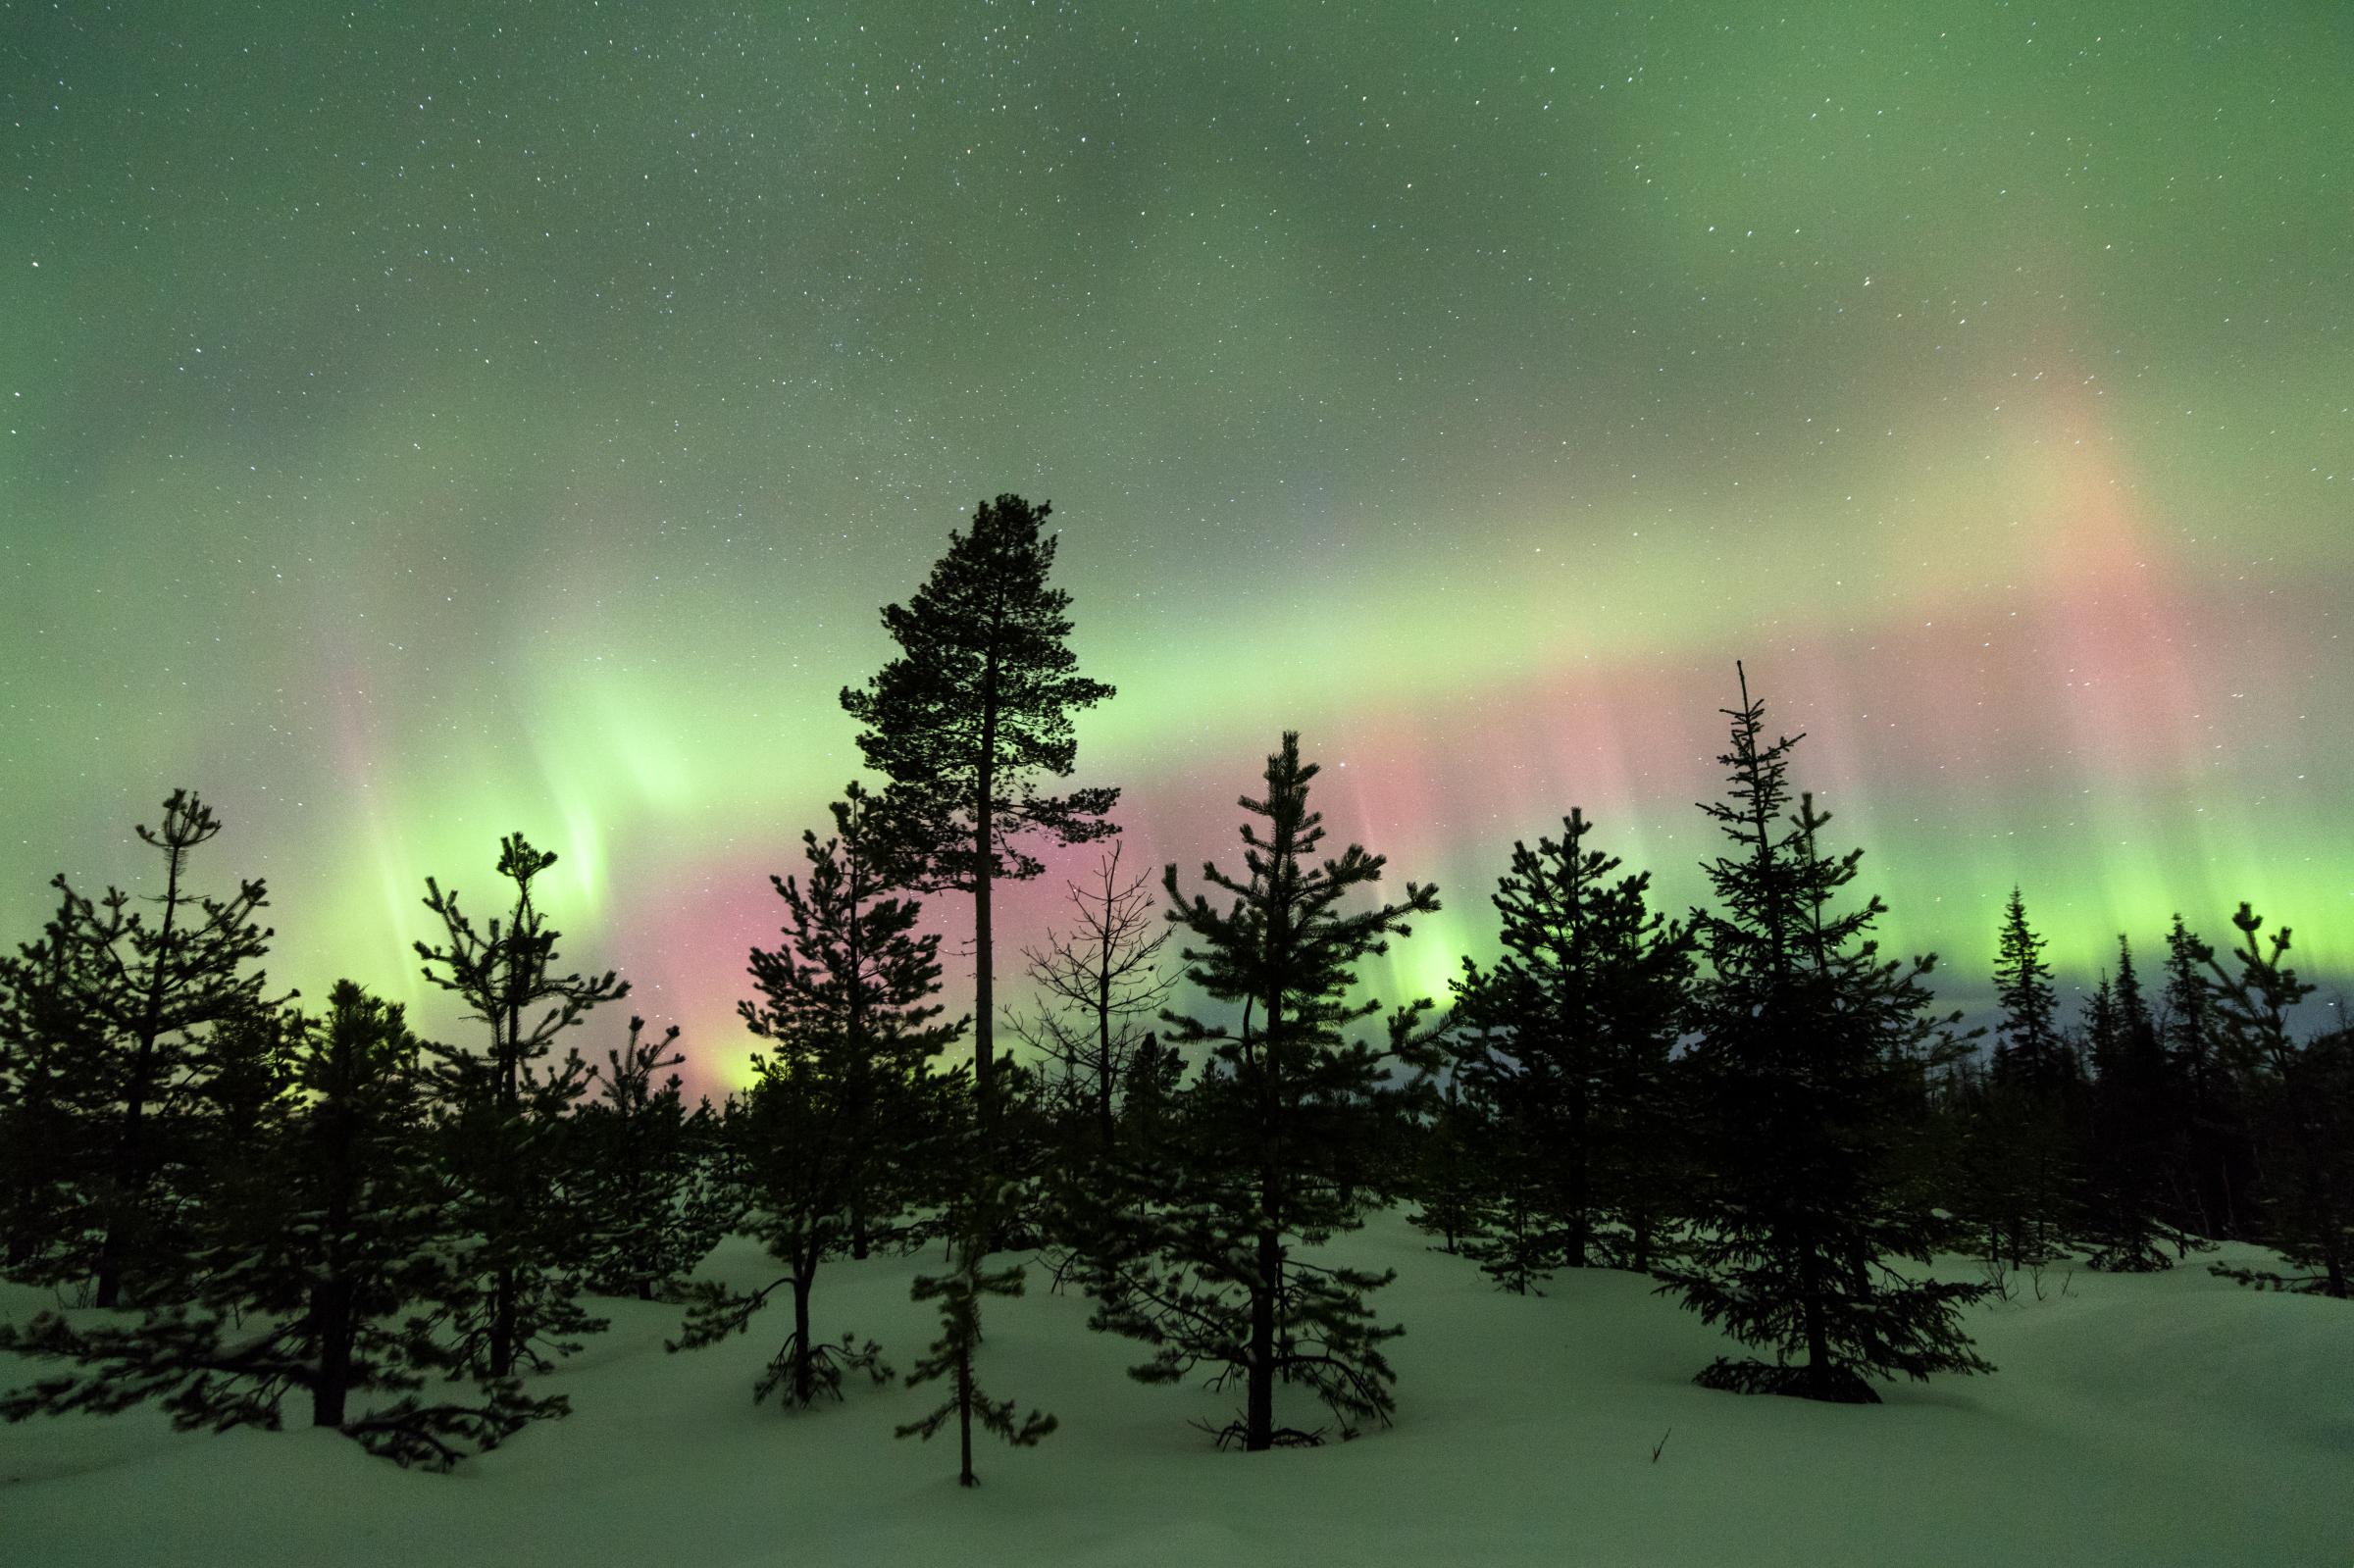 Colorful lights of the Northern Lights (Aurora Borealis) and starry sky on the snowy woods, Levi, Sirkka, Kittila, Lapland region, Finland, Europe